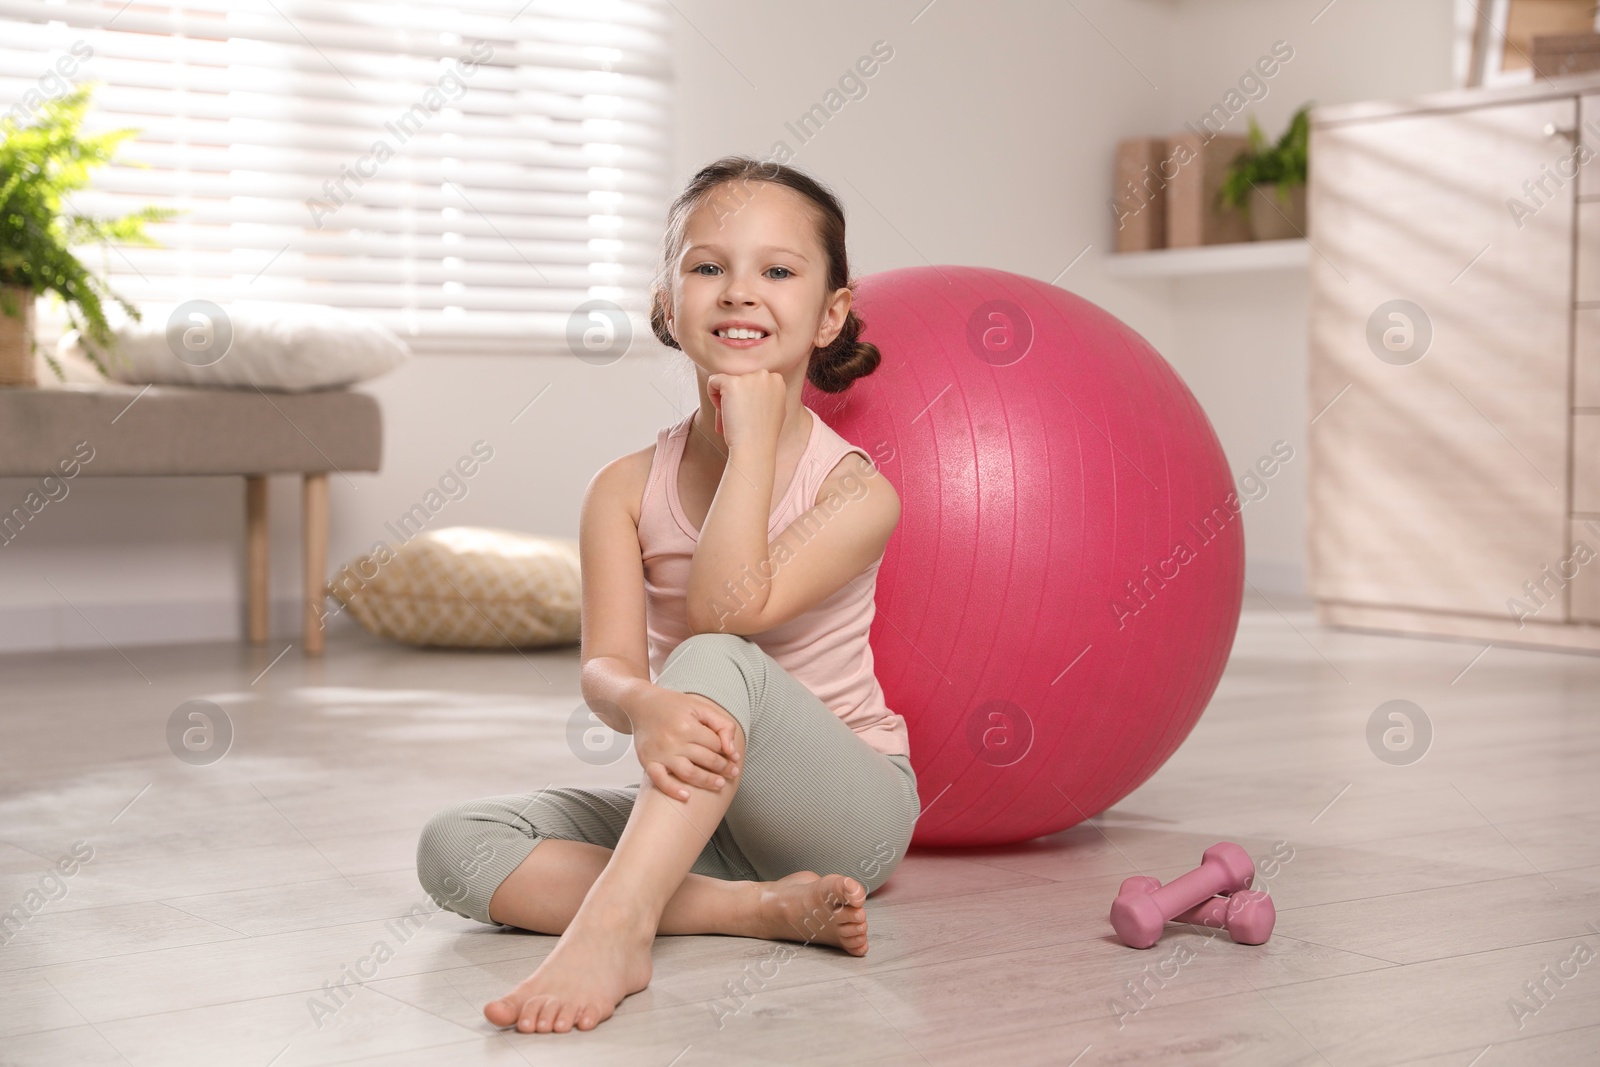 Photo of Cute little girl near dumbbells and fit ball at home